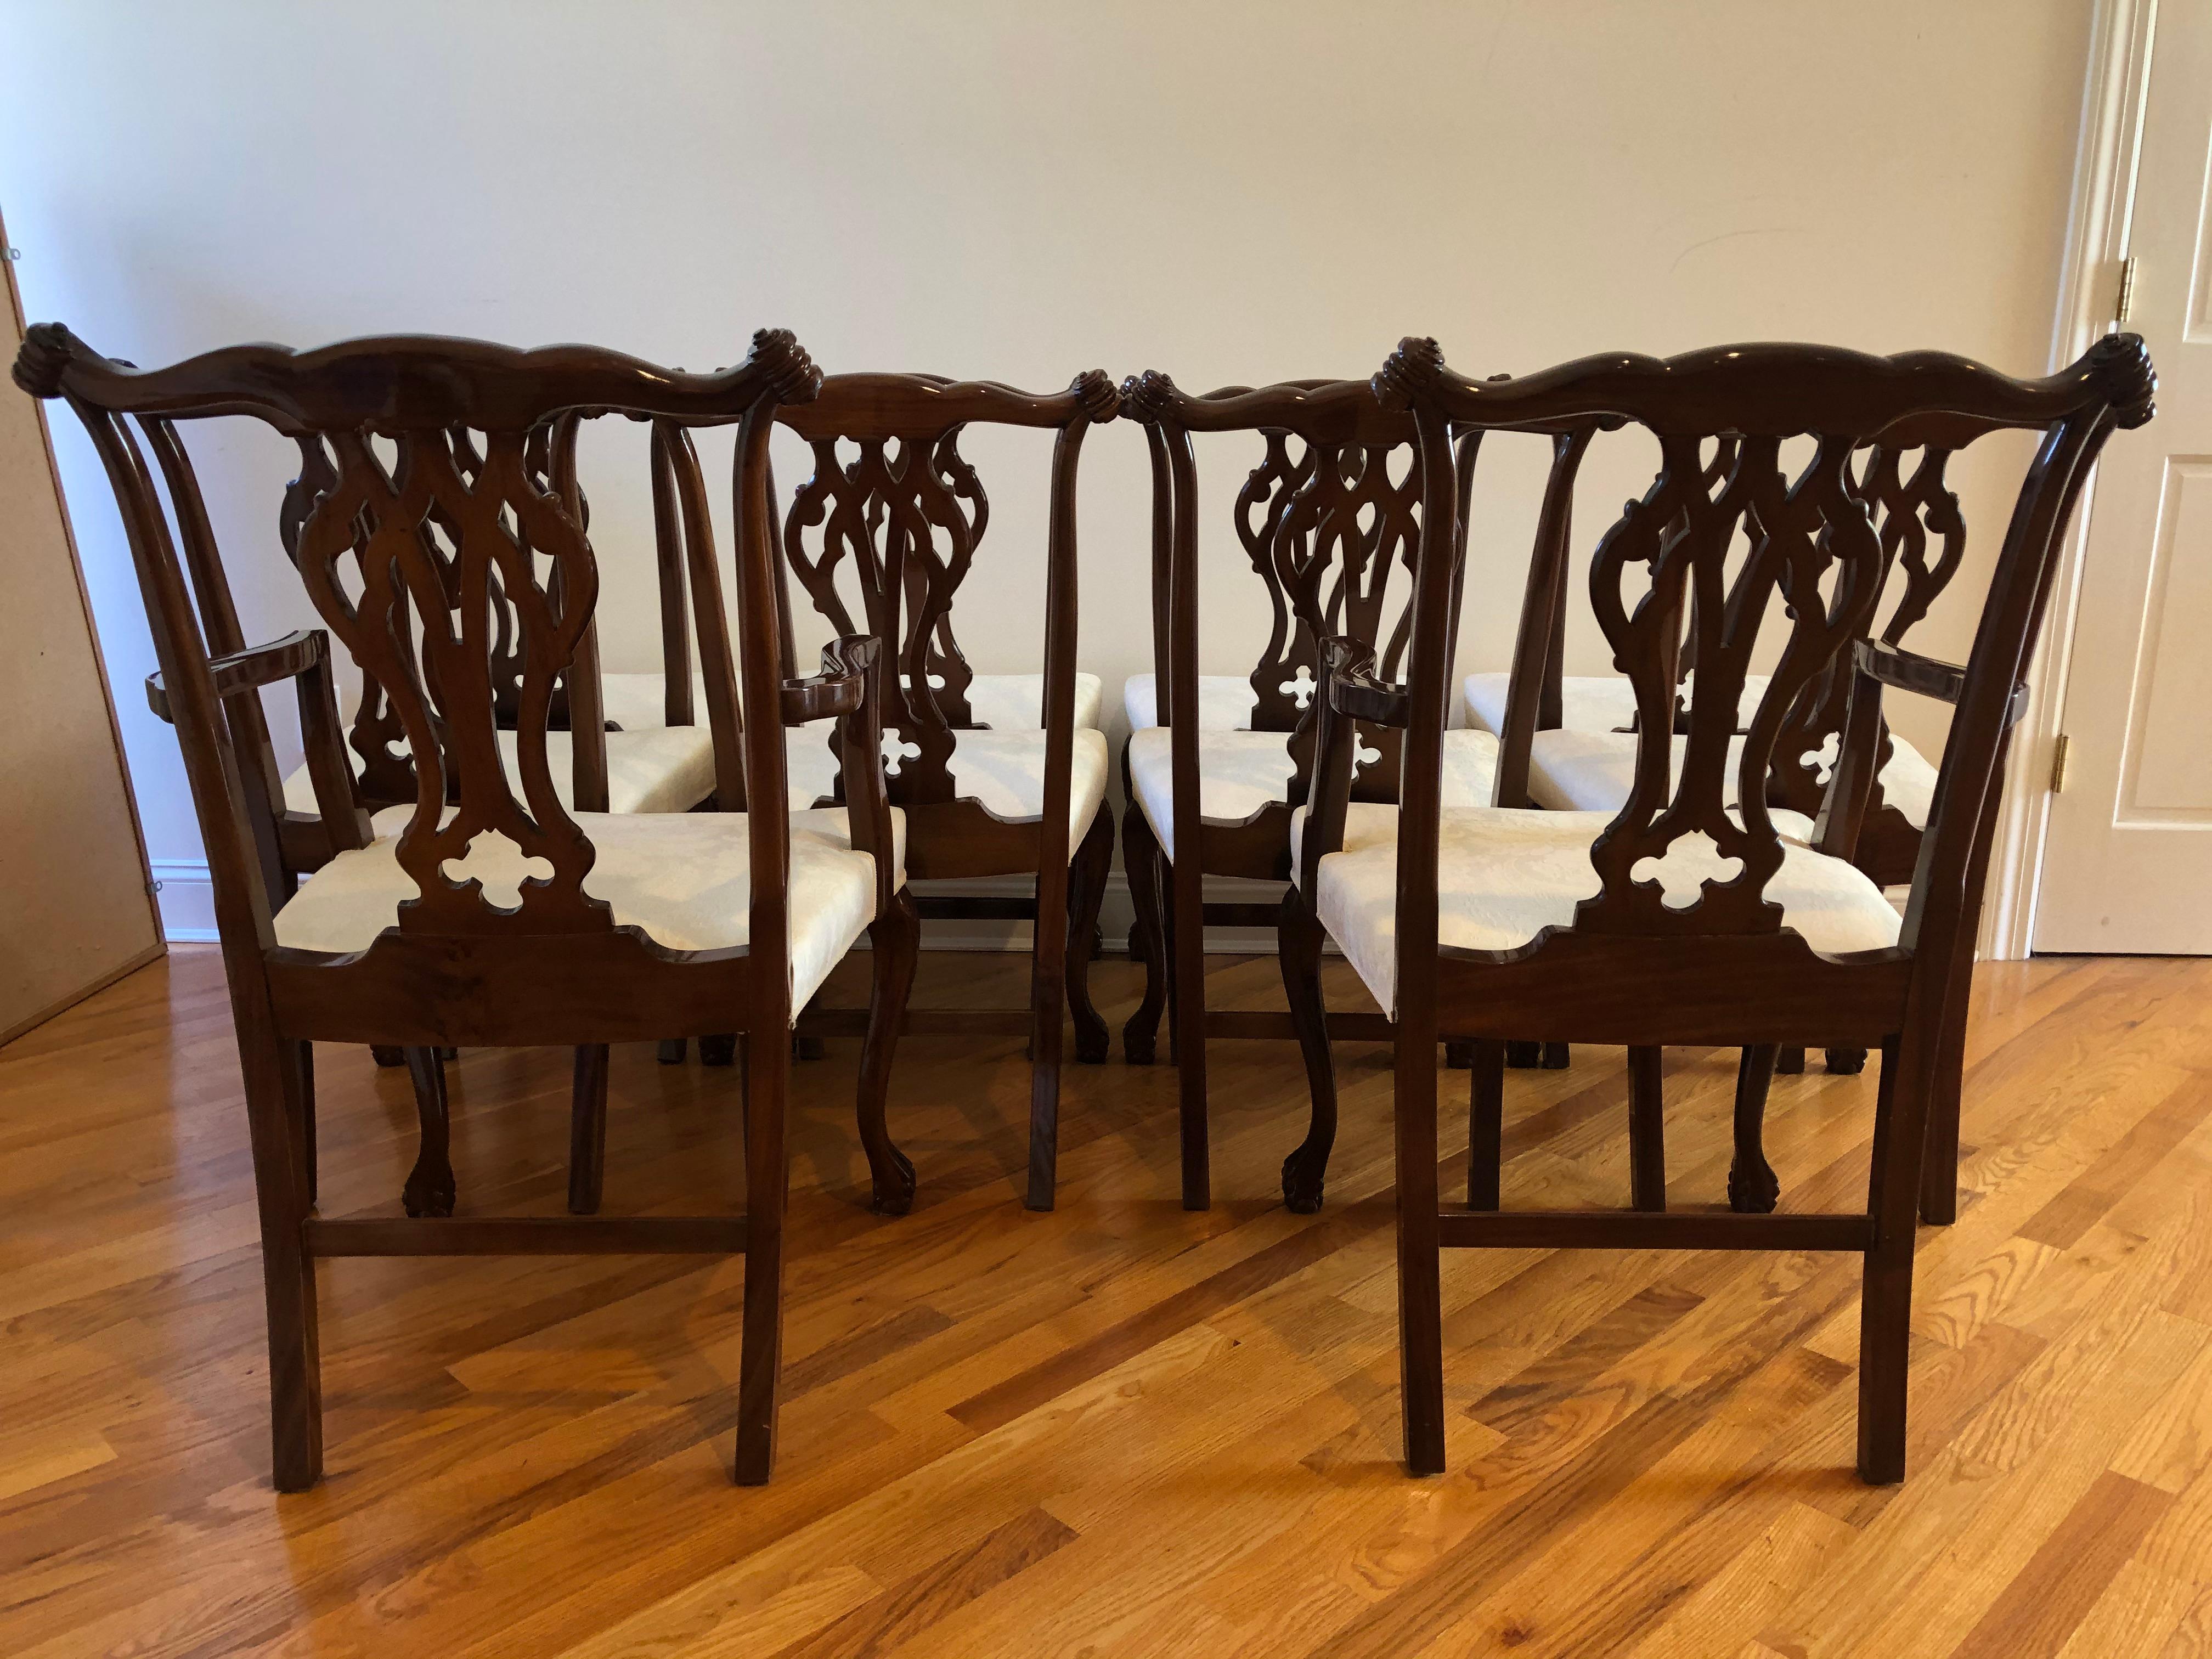 An impressive classically elegant set of 10 Chippendale style hardwood dining chairs bought in Buenos Aires 35 years ago. The wood is Petiribi, a dark mahogany like rich wood used for fine furniture. There are 2 arm chairs and 8 side. Stunning